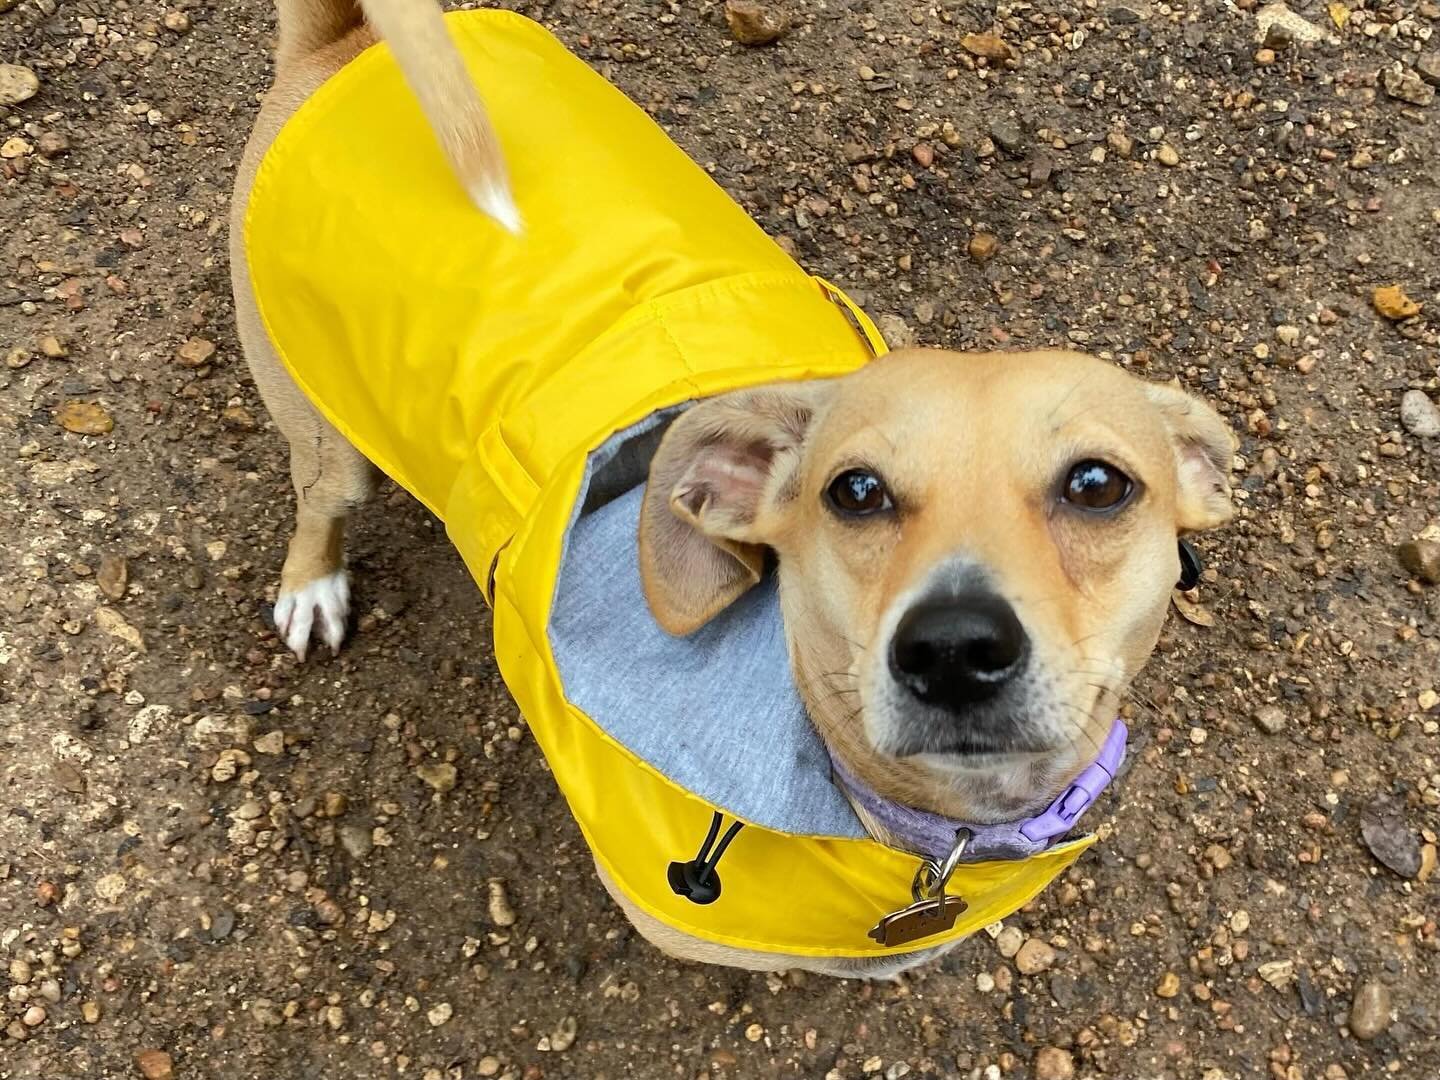 Everyone meet Toast! She&rsquo;s a new member of our littles pack, here for her first day! And she was NOT going to let a little rain keep her from coming in for her first day today! That&rsquo;s the spirit Toast! ☔️ .
.
.
#pupsandpalssouthpark #pups